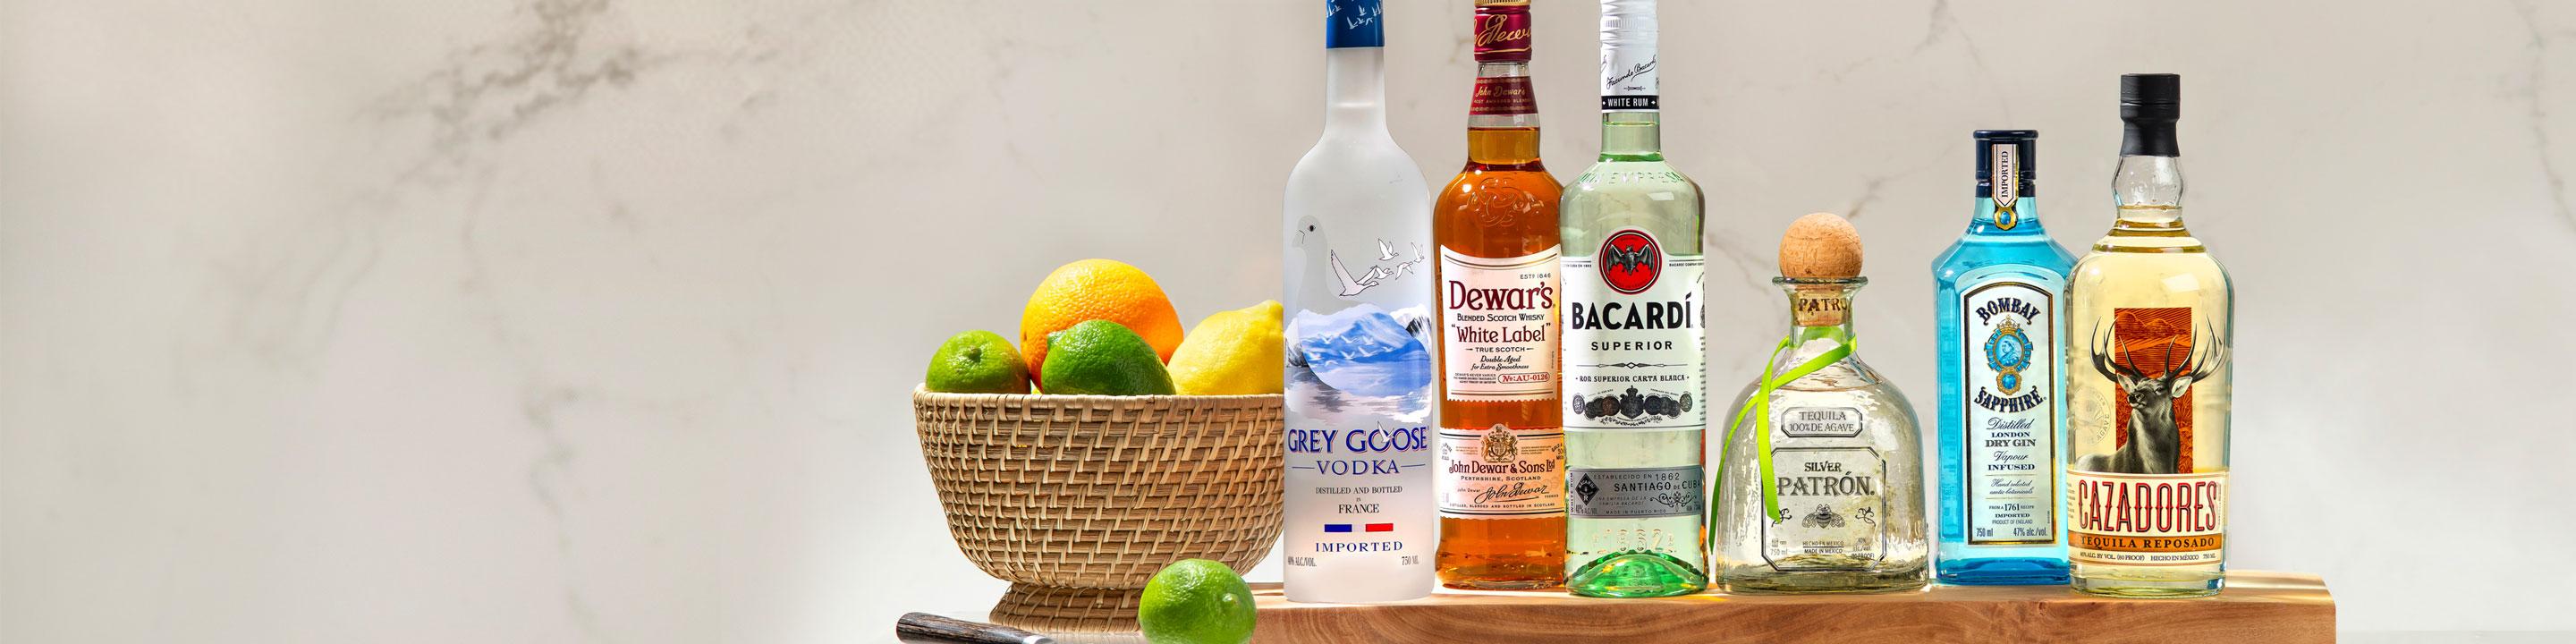 Founded in 1944, Bacardi is the largest privately-held spirits company in the world. Stock up on favorites like Patrón Tequila, Grey Goose Vodka, and Bombay Sapphire, delivered right to your door with Minibar Delivery.